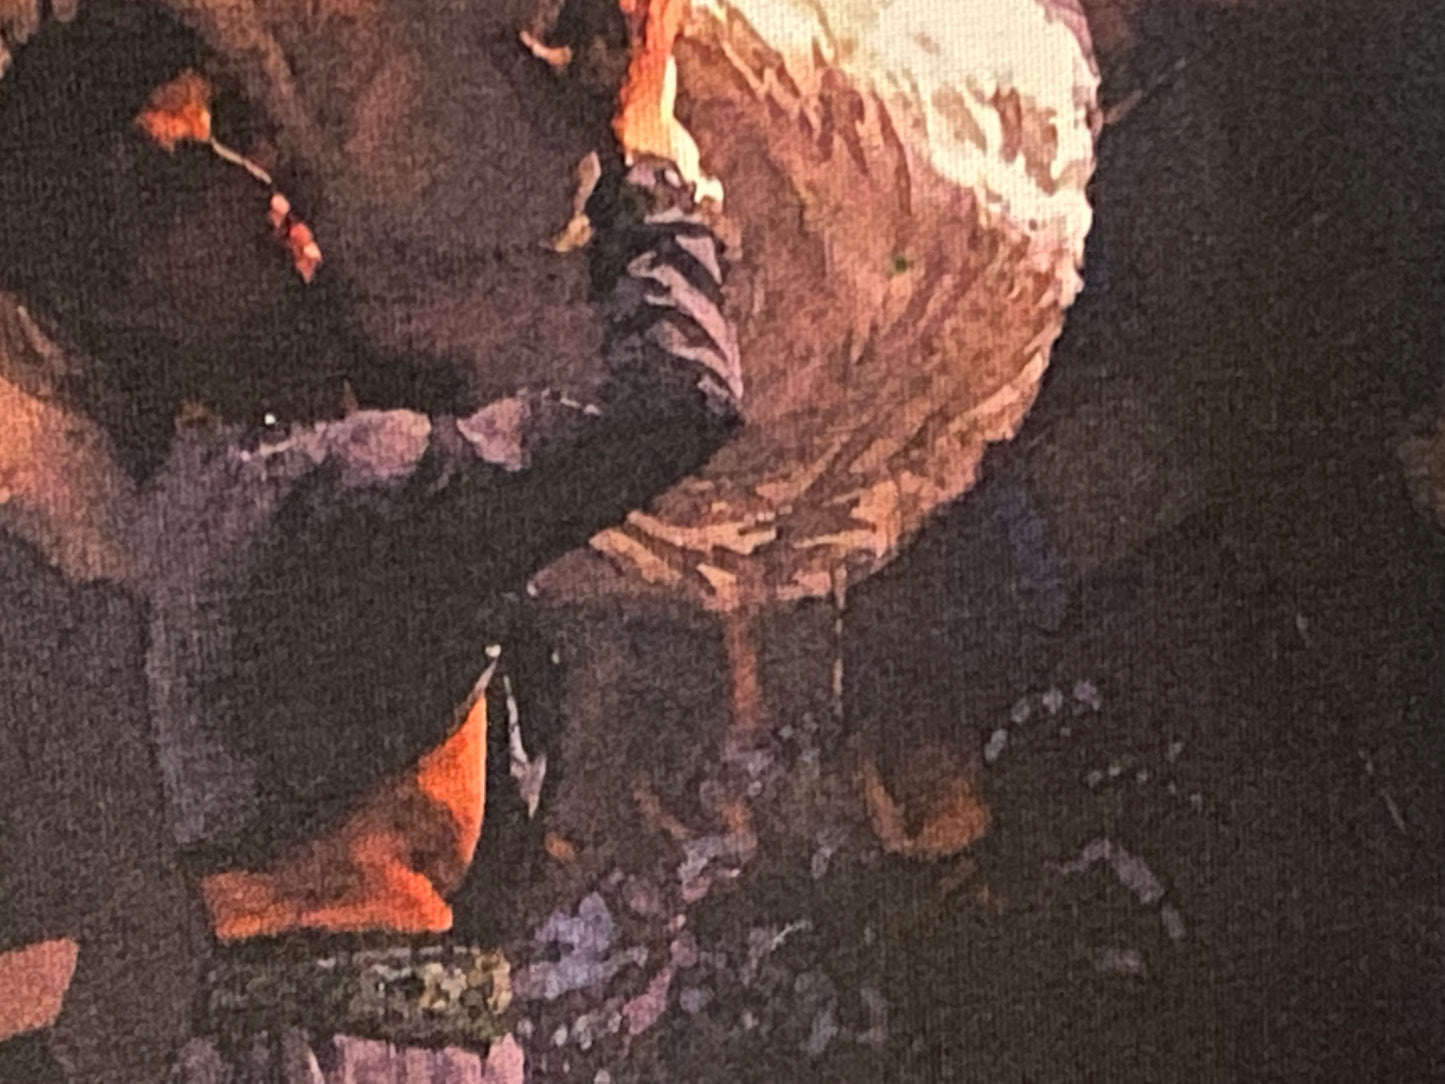 detail section of an oil on canvas print showing the male dancer upper body